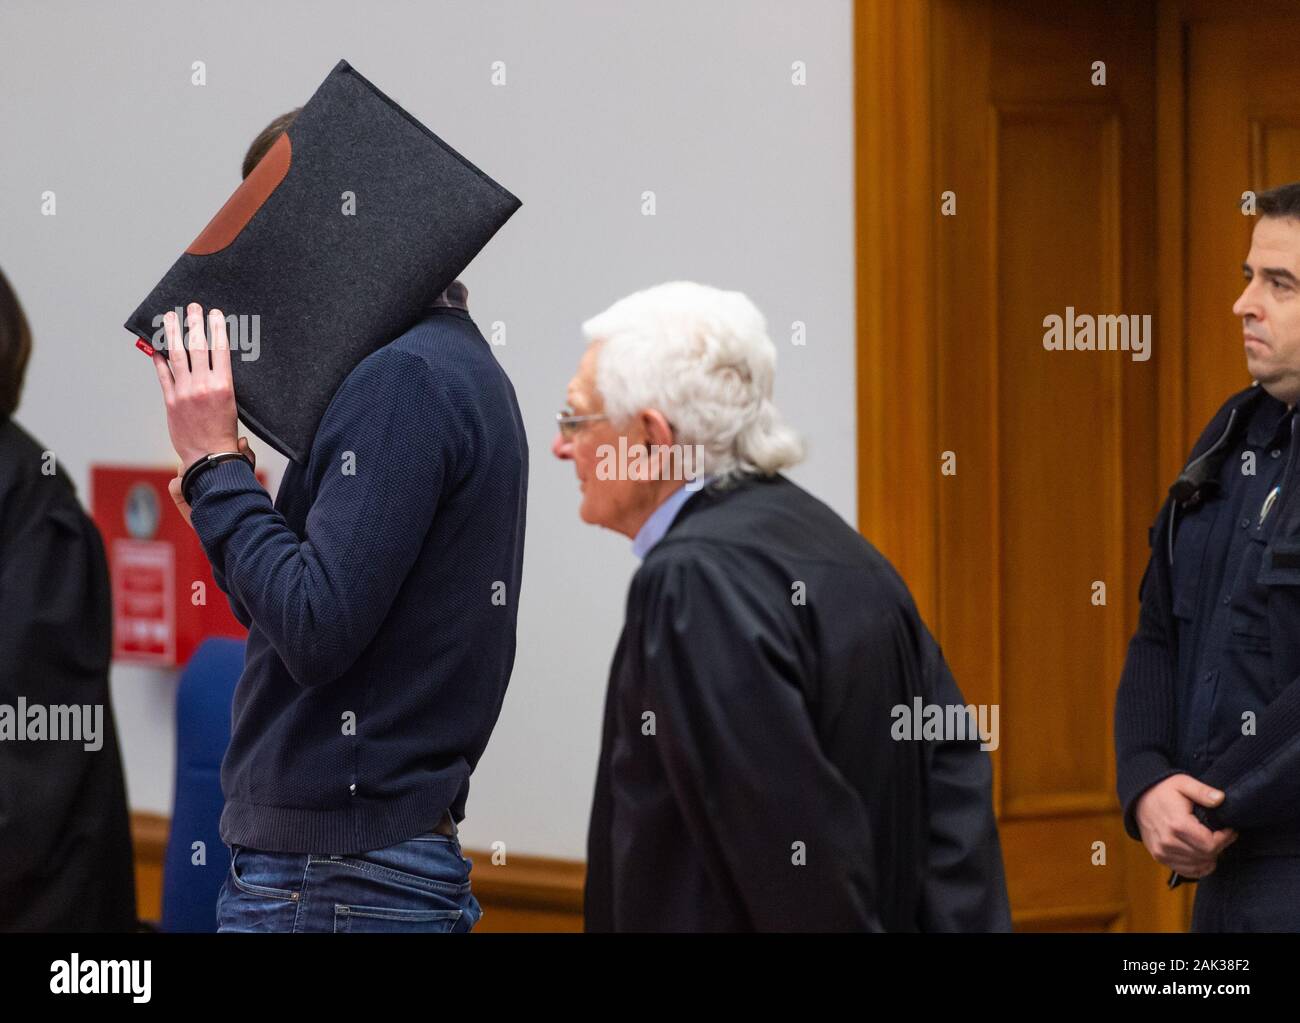 07 January 2020, Lower Saxony, Lüneburg: The defendant (l) stands next to Herbert Lederer (M), his lawyer, in the Lüneburg Regional Court before the start of the trial. The 26-year-old is alleged to have sexually abused several children in Lueneburg and other places as trainer and supervisor of a DLRG local group. Photo: Philipp Schulze/dpa Stock Photo